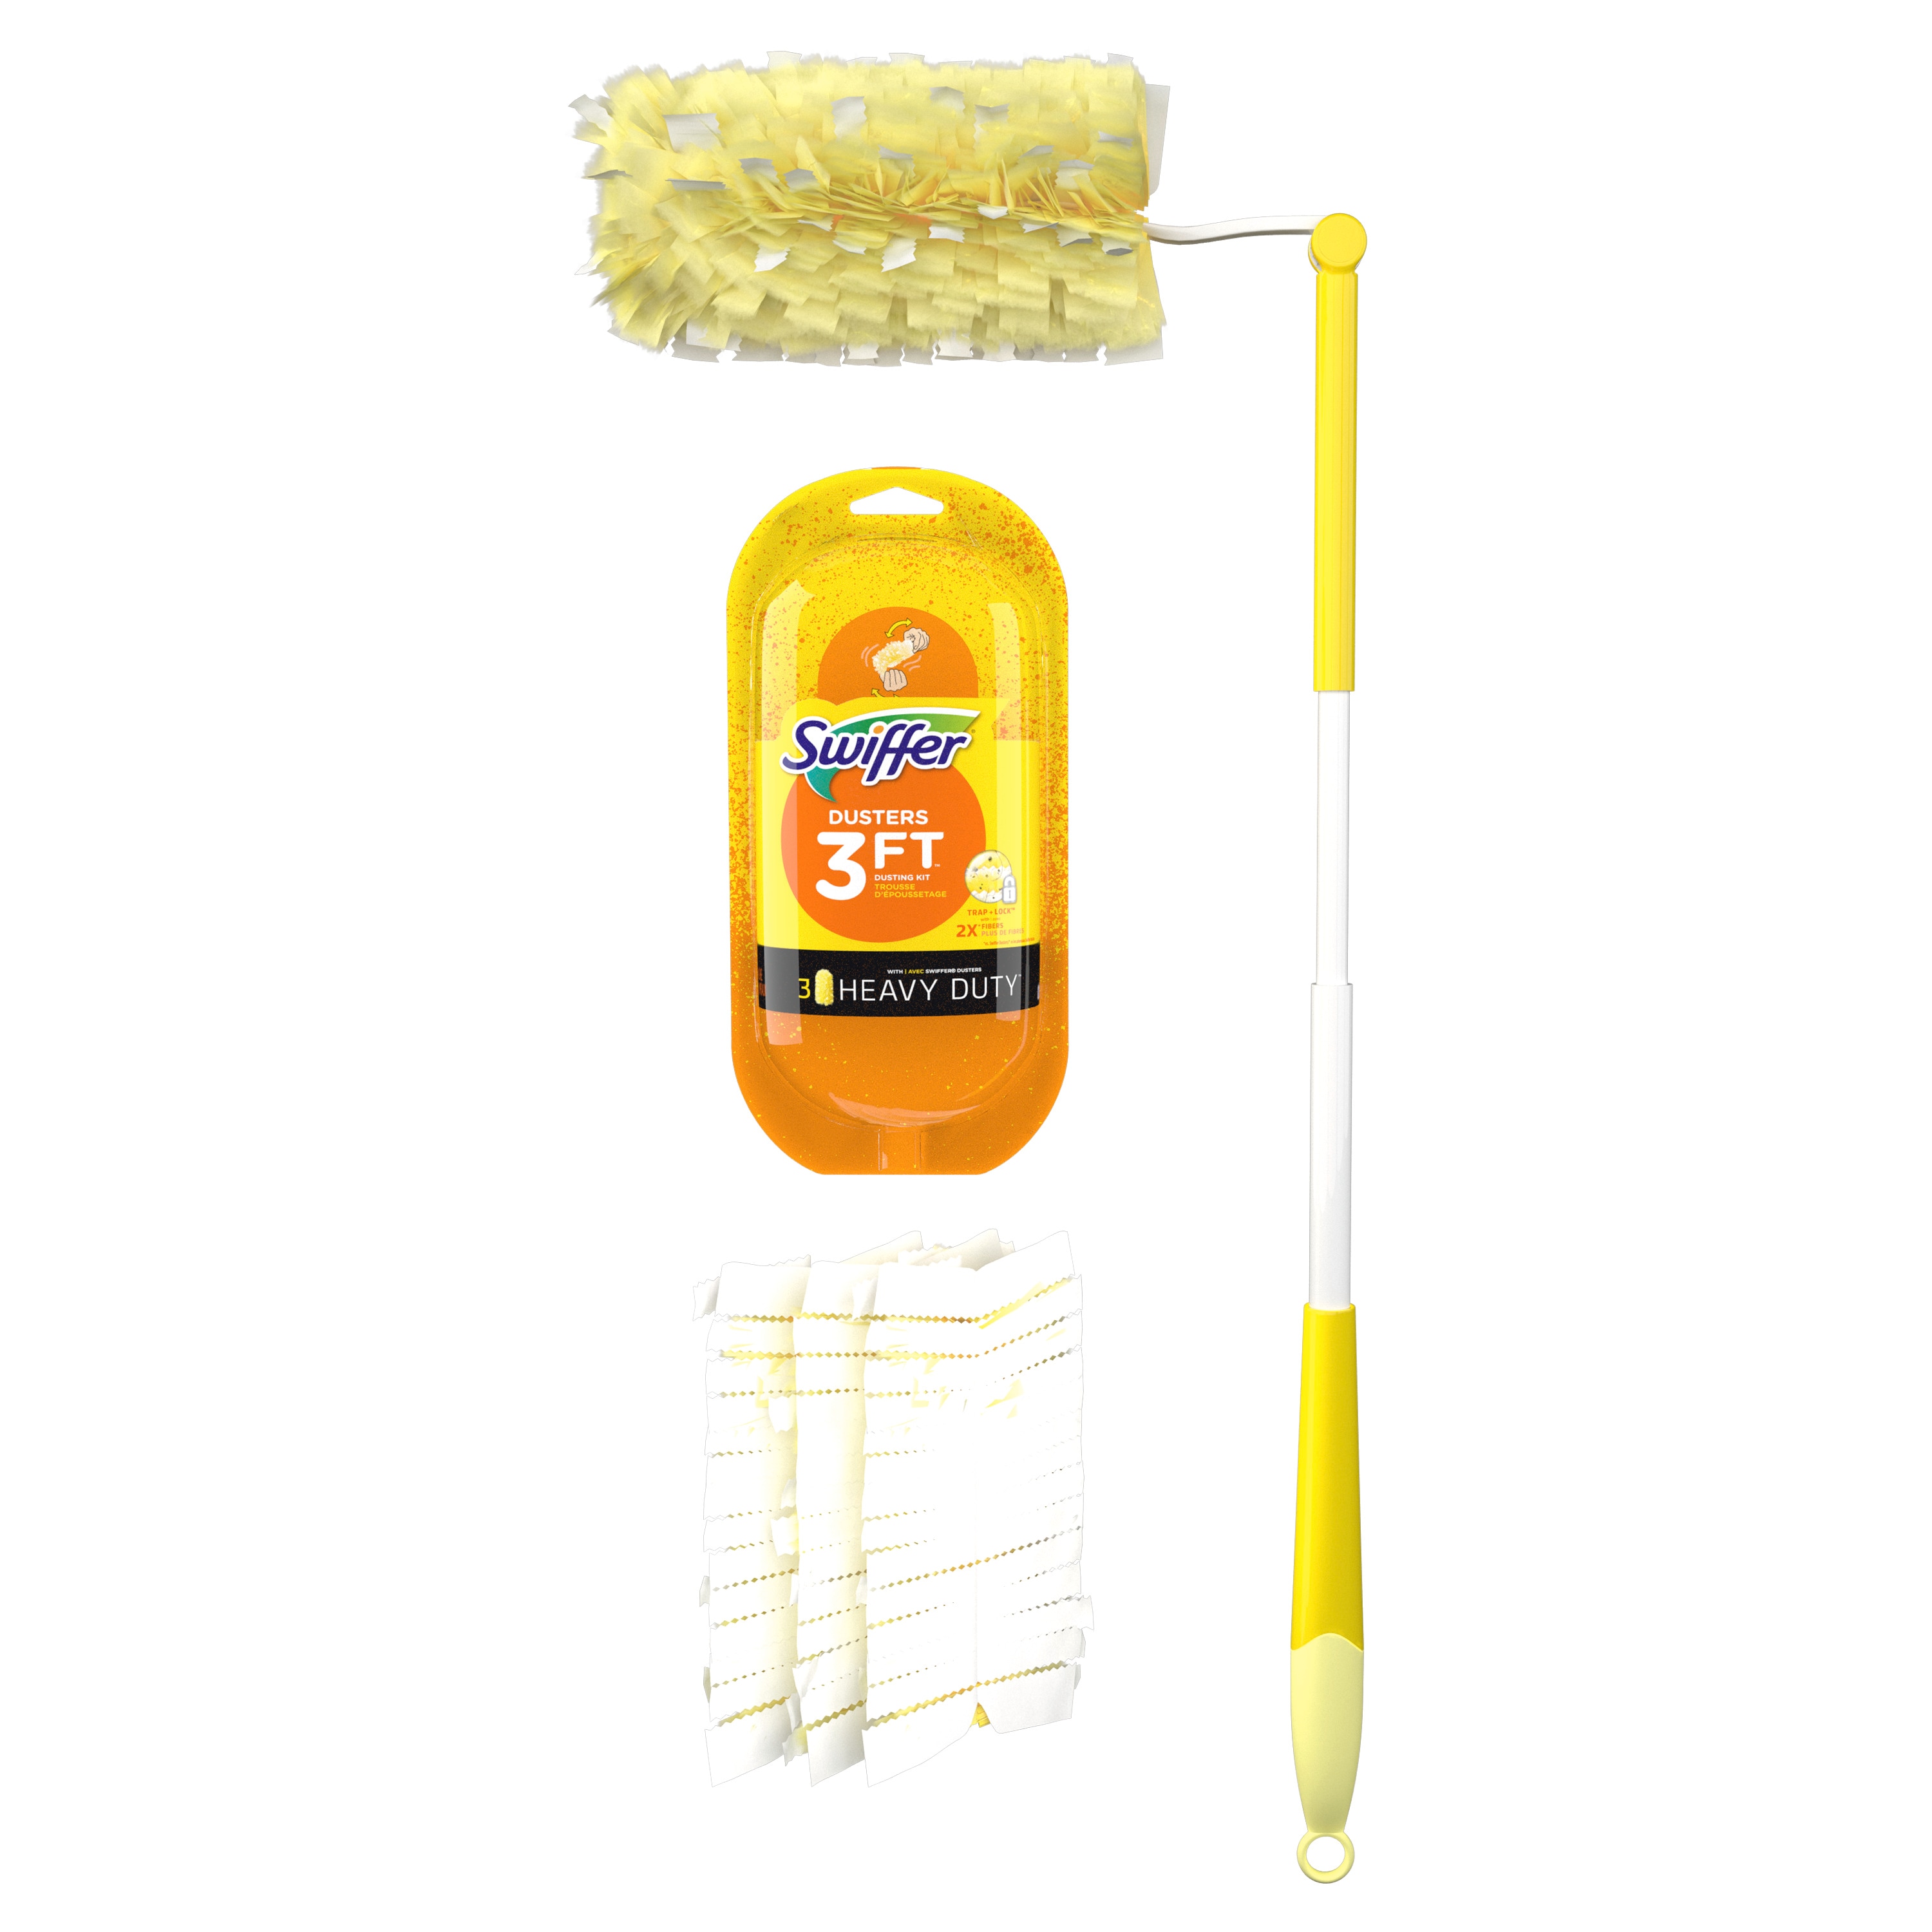 Swiffer Dusters Heavy Duty Super Extendable Handle Dusting Kit (1 Handle, 4  Dusters)